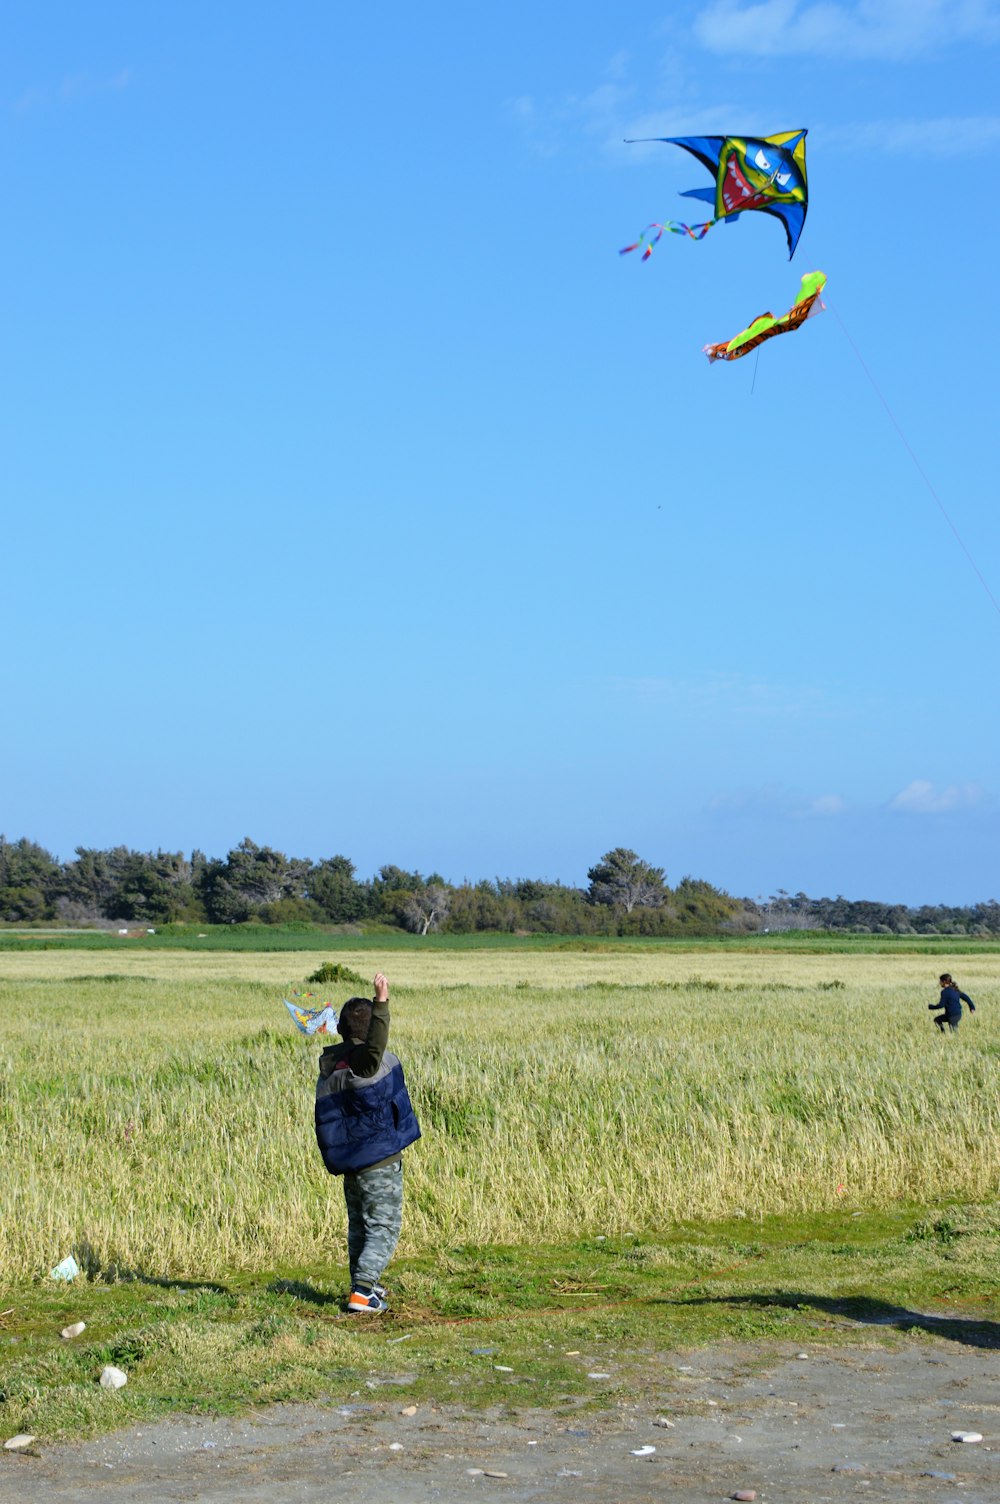 a person flying a kite in a field